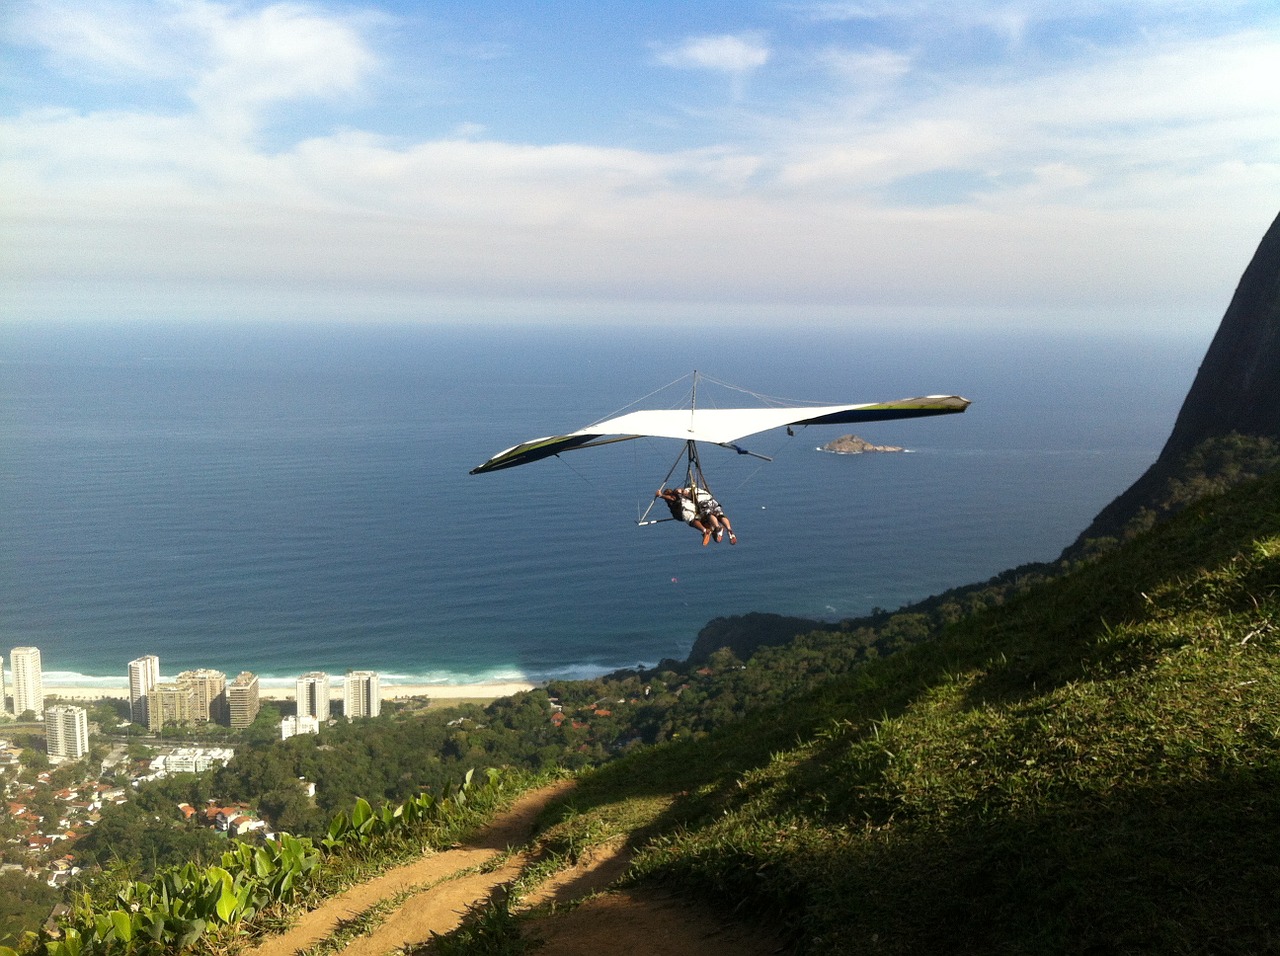 Hang gliding vs. Wingsuit - Fun, Speed, and Safety Guides